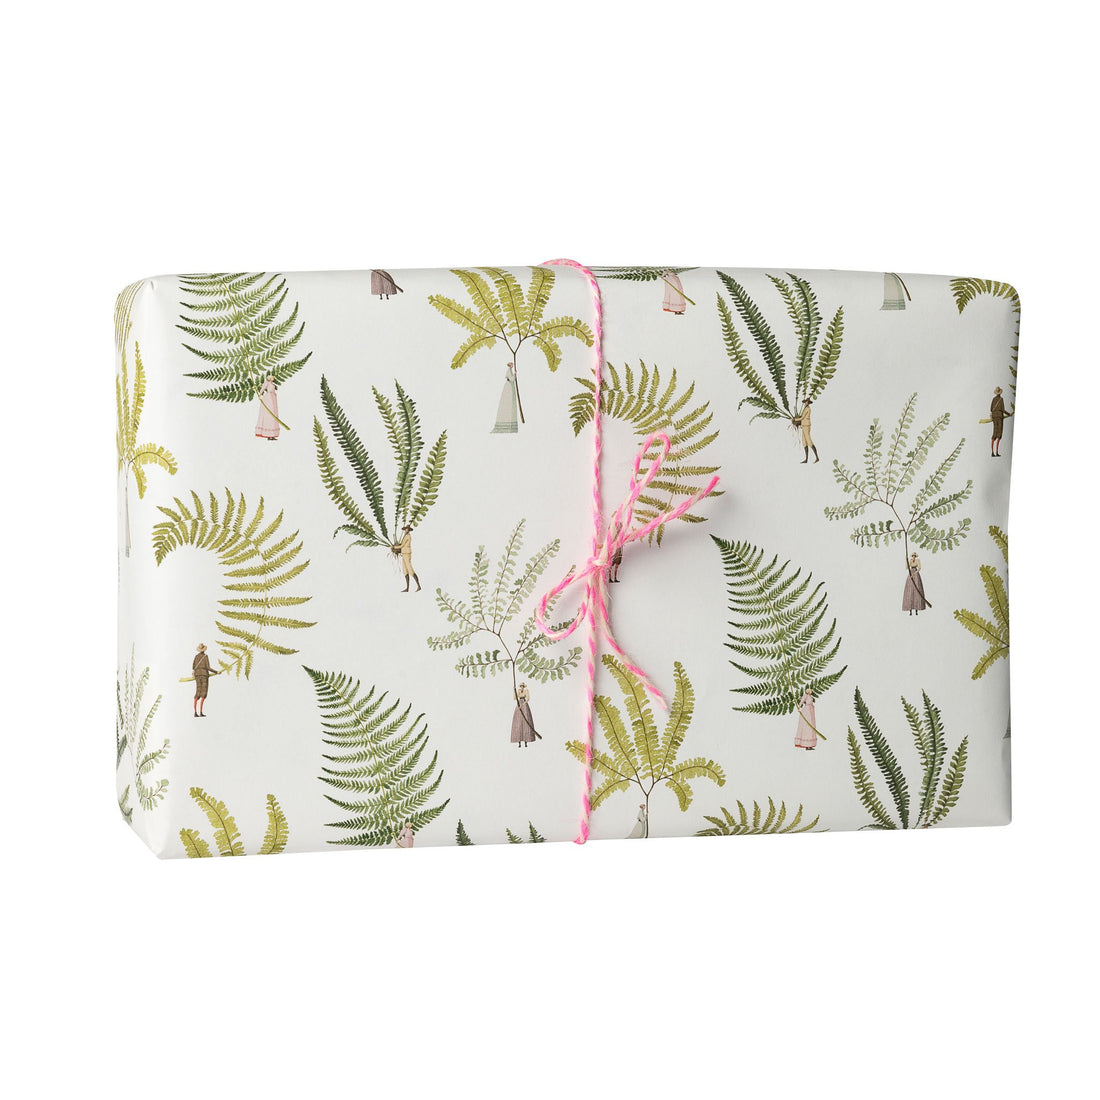 giftwrap, wrapping paper, fsc paper, made in england, illustration, flowers, ferns